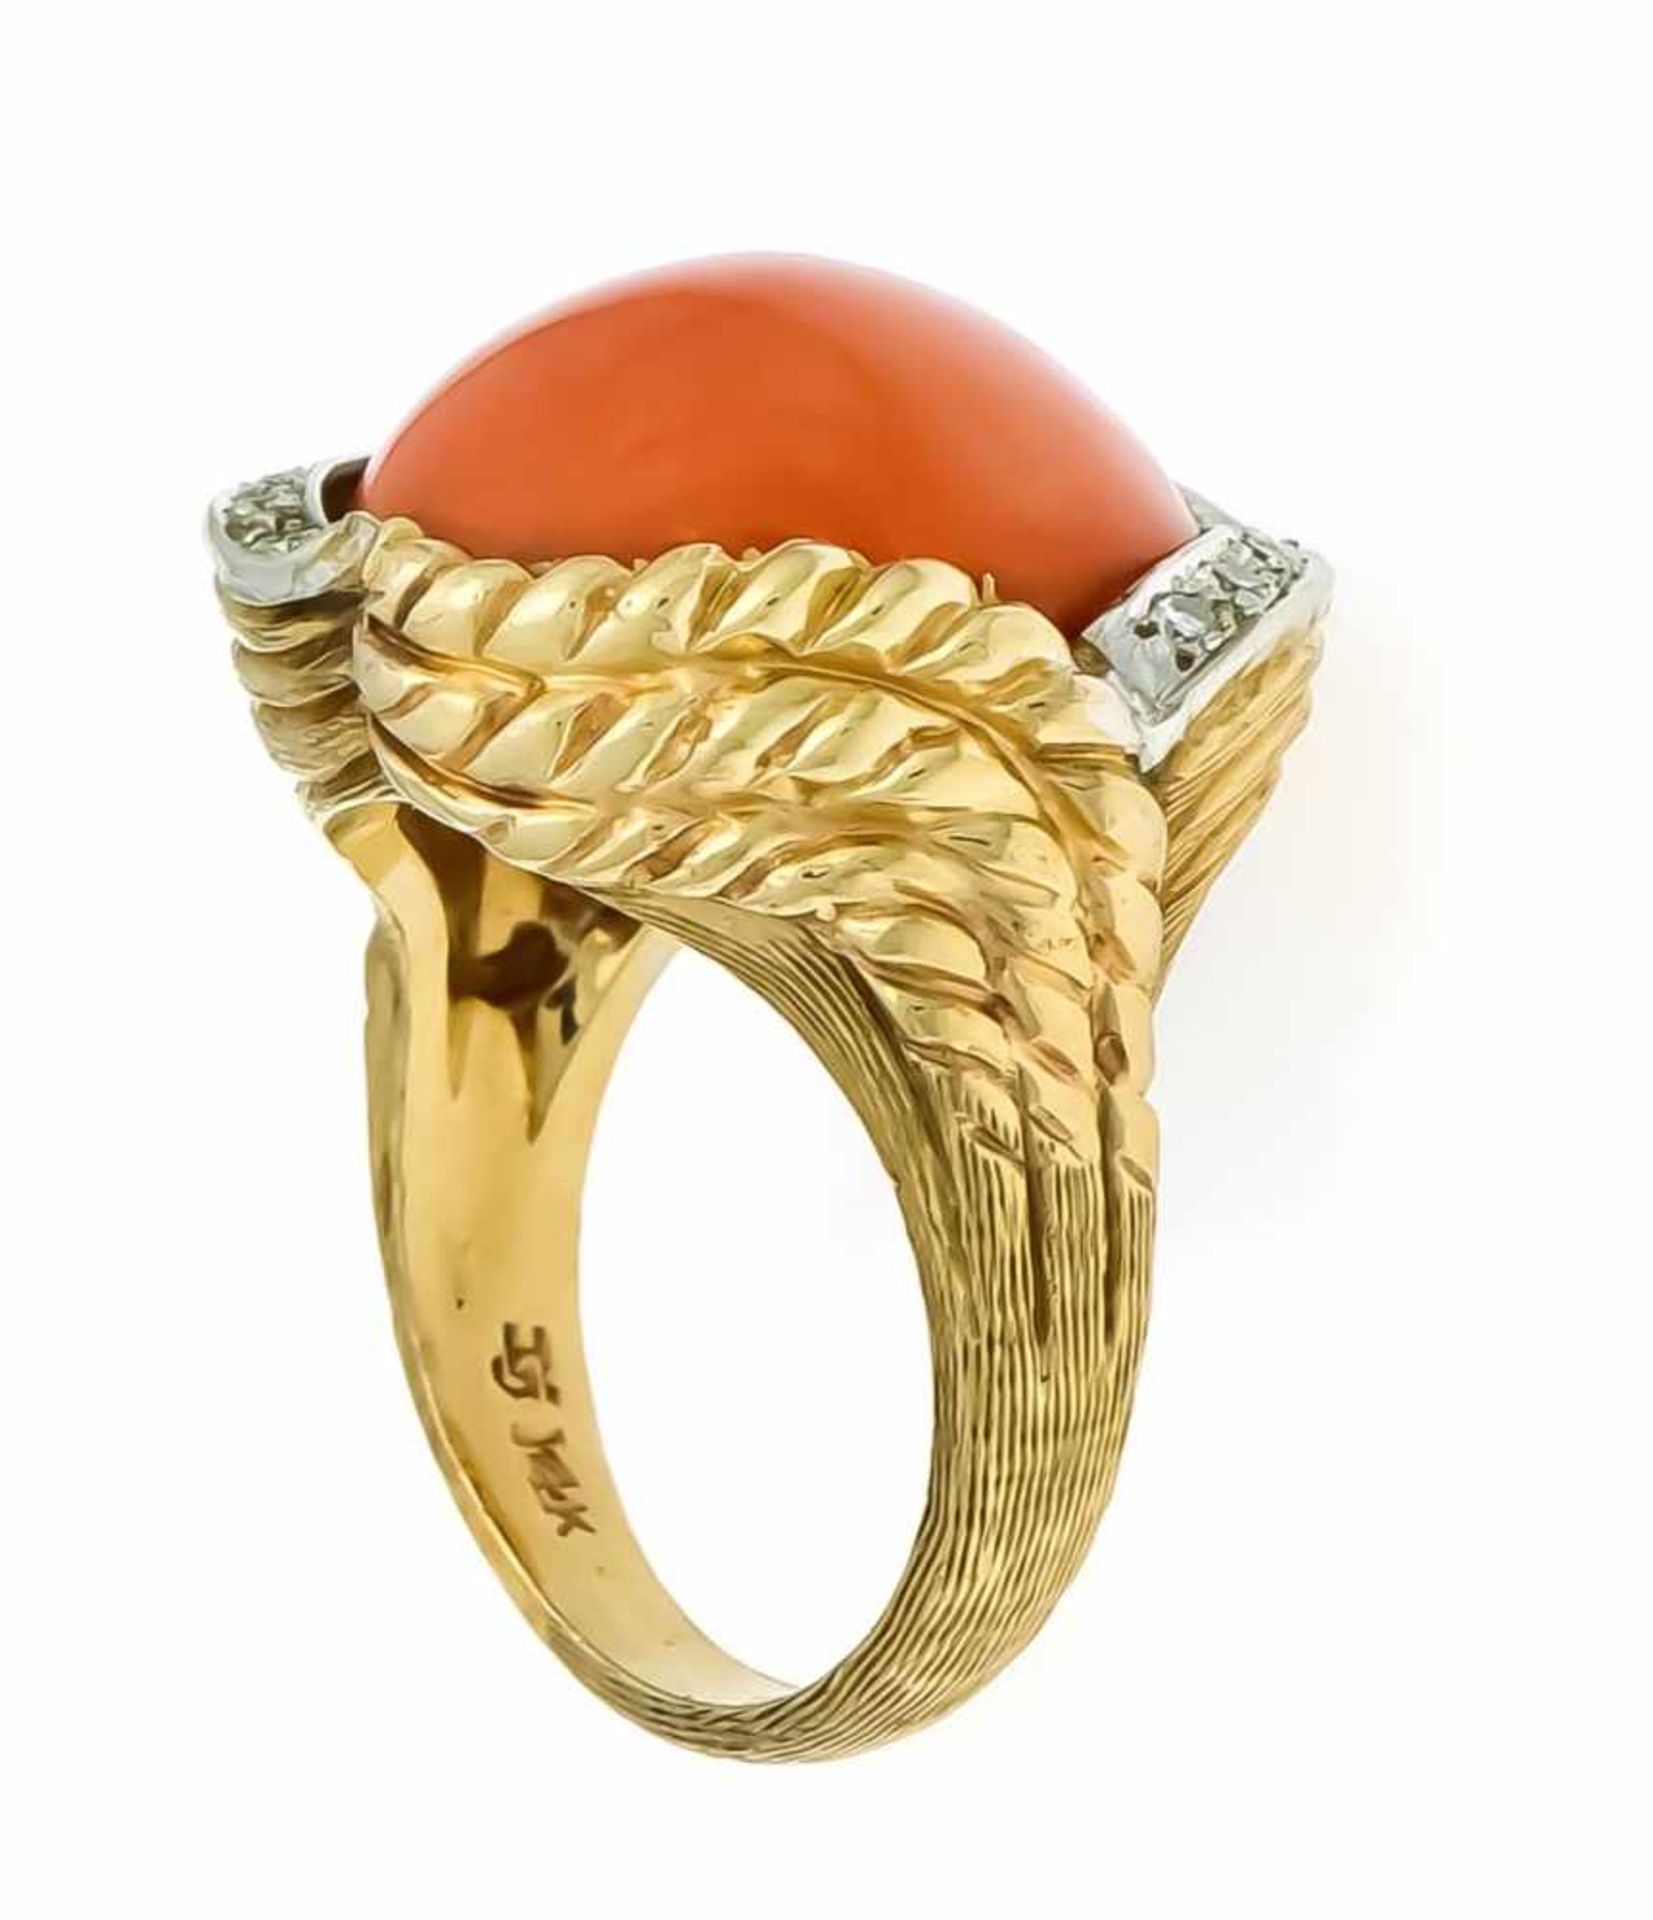 Coral ring RG / WG 585/000 with an orange-red, round coral cabochon 16 mm and 10 diamonds, - Image 2 of 2